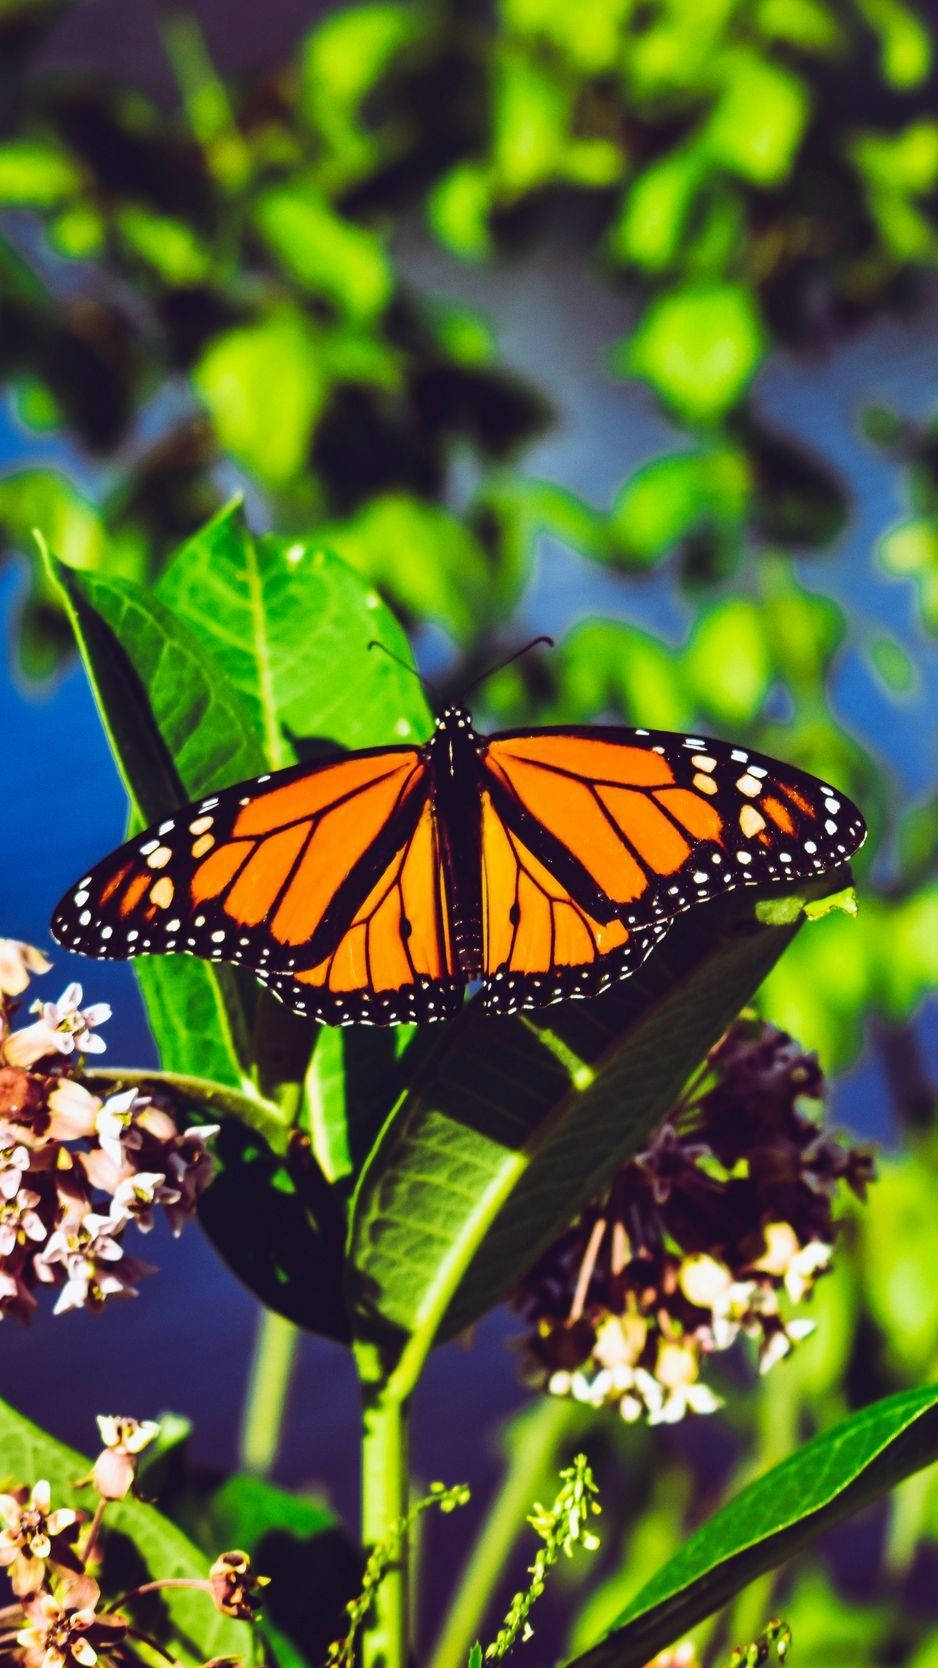 Fascinating Butterfly Iphone Screen Display Wallpaper